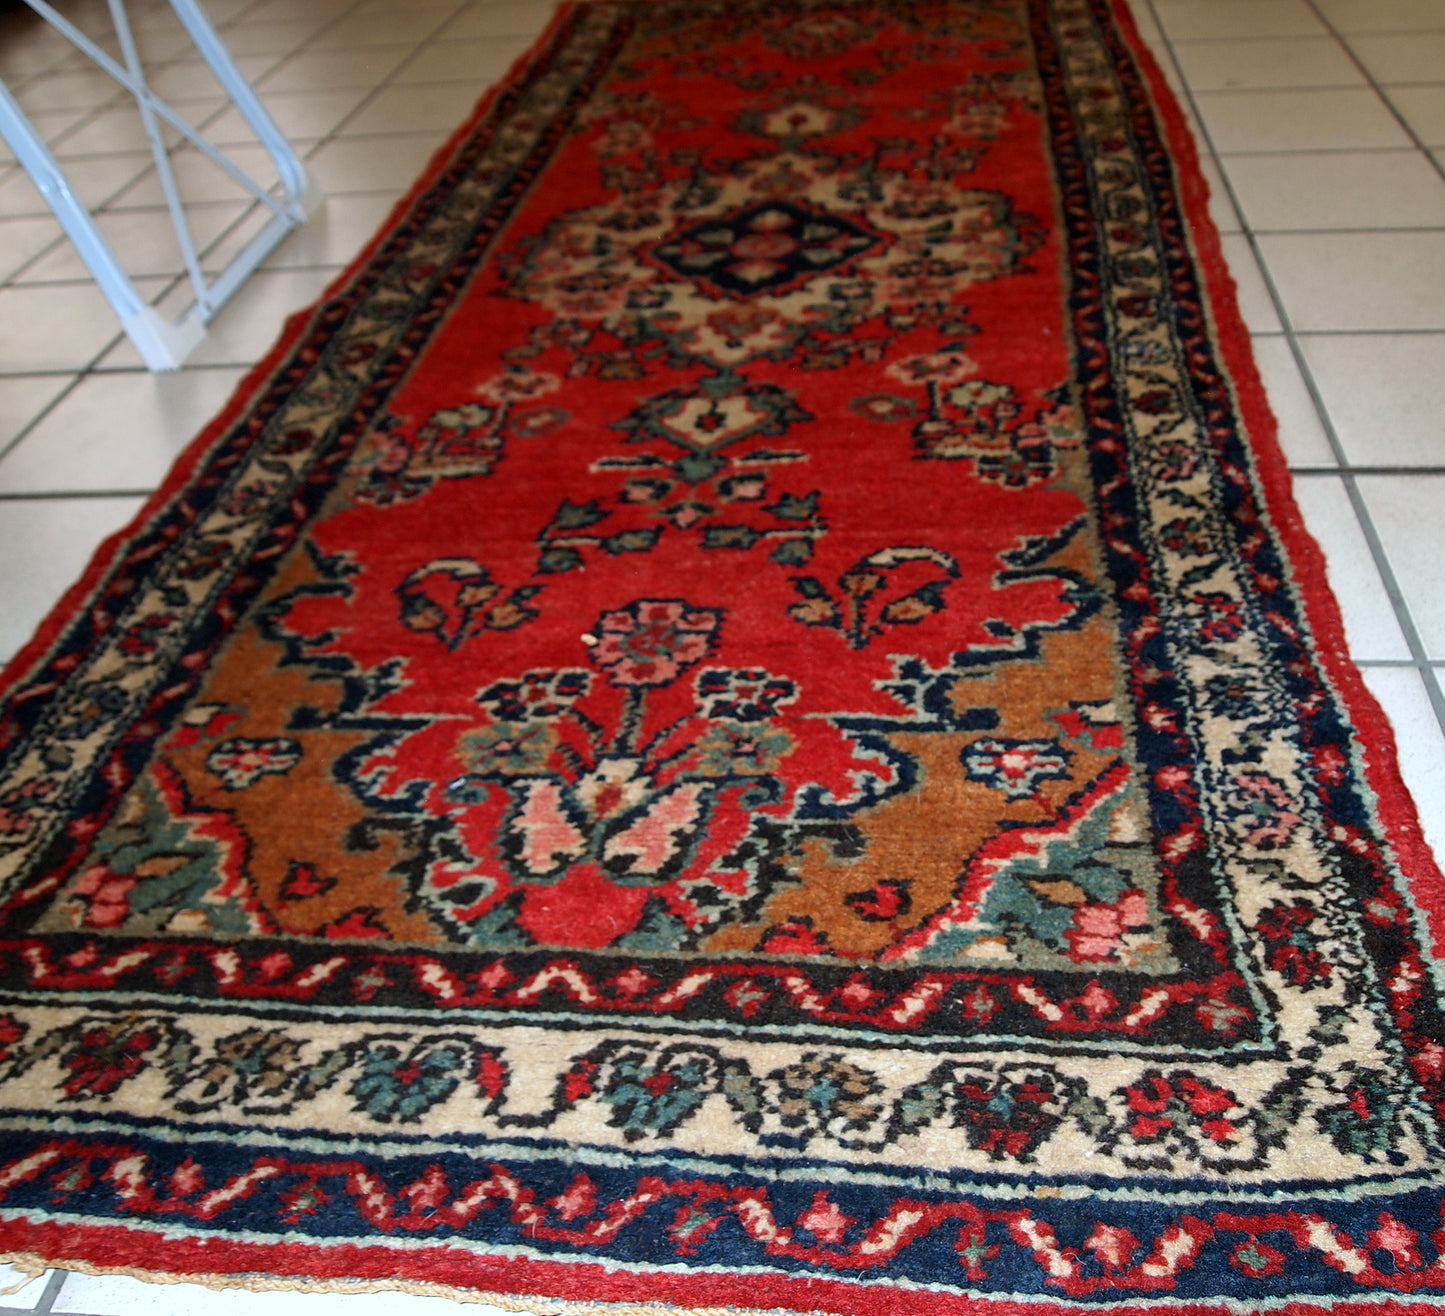 Handmade vintage Hamadan runner in red wool. This rug has been made in the middle of 20th century in Middle East region.